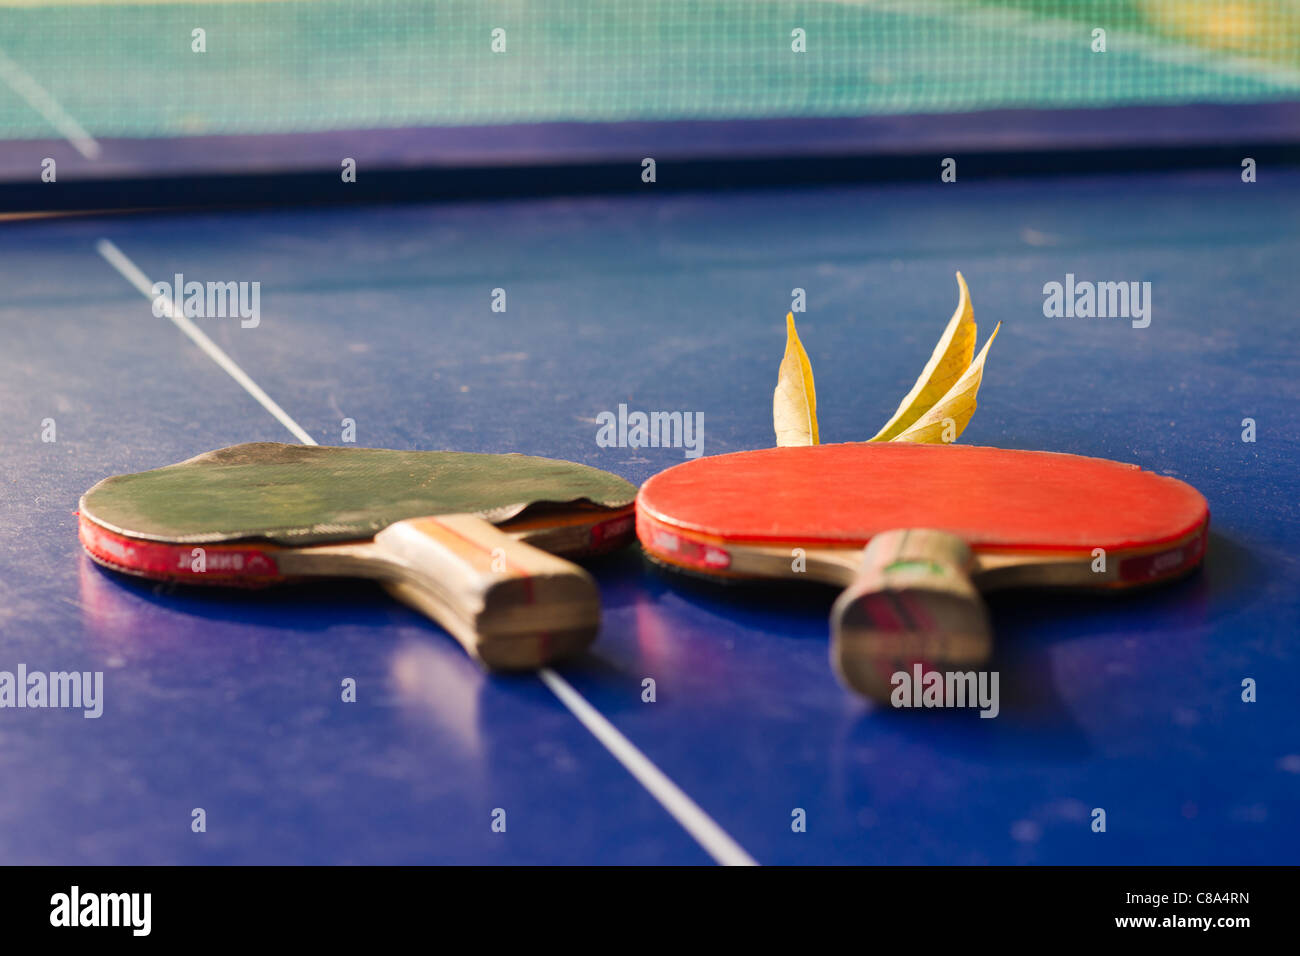 Two ping-pong bats, the red one and the black one,  on a blue tennis table and a yellow autumn leaf. Net in the background Stock Photo